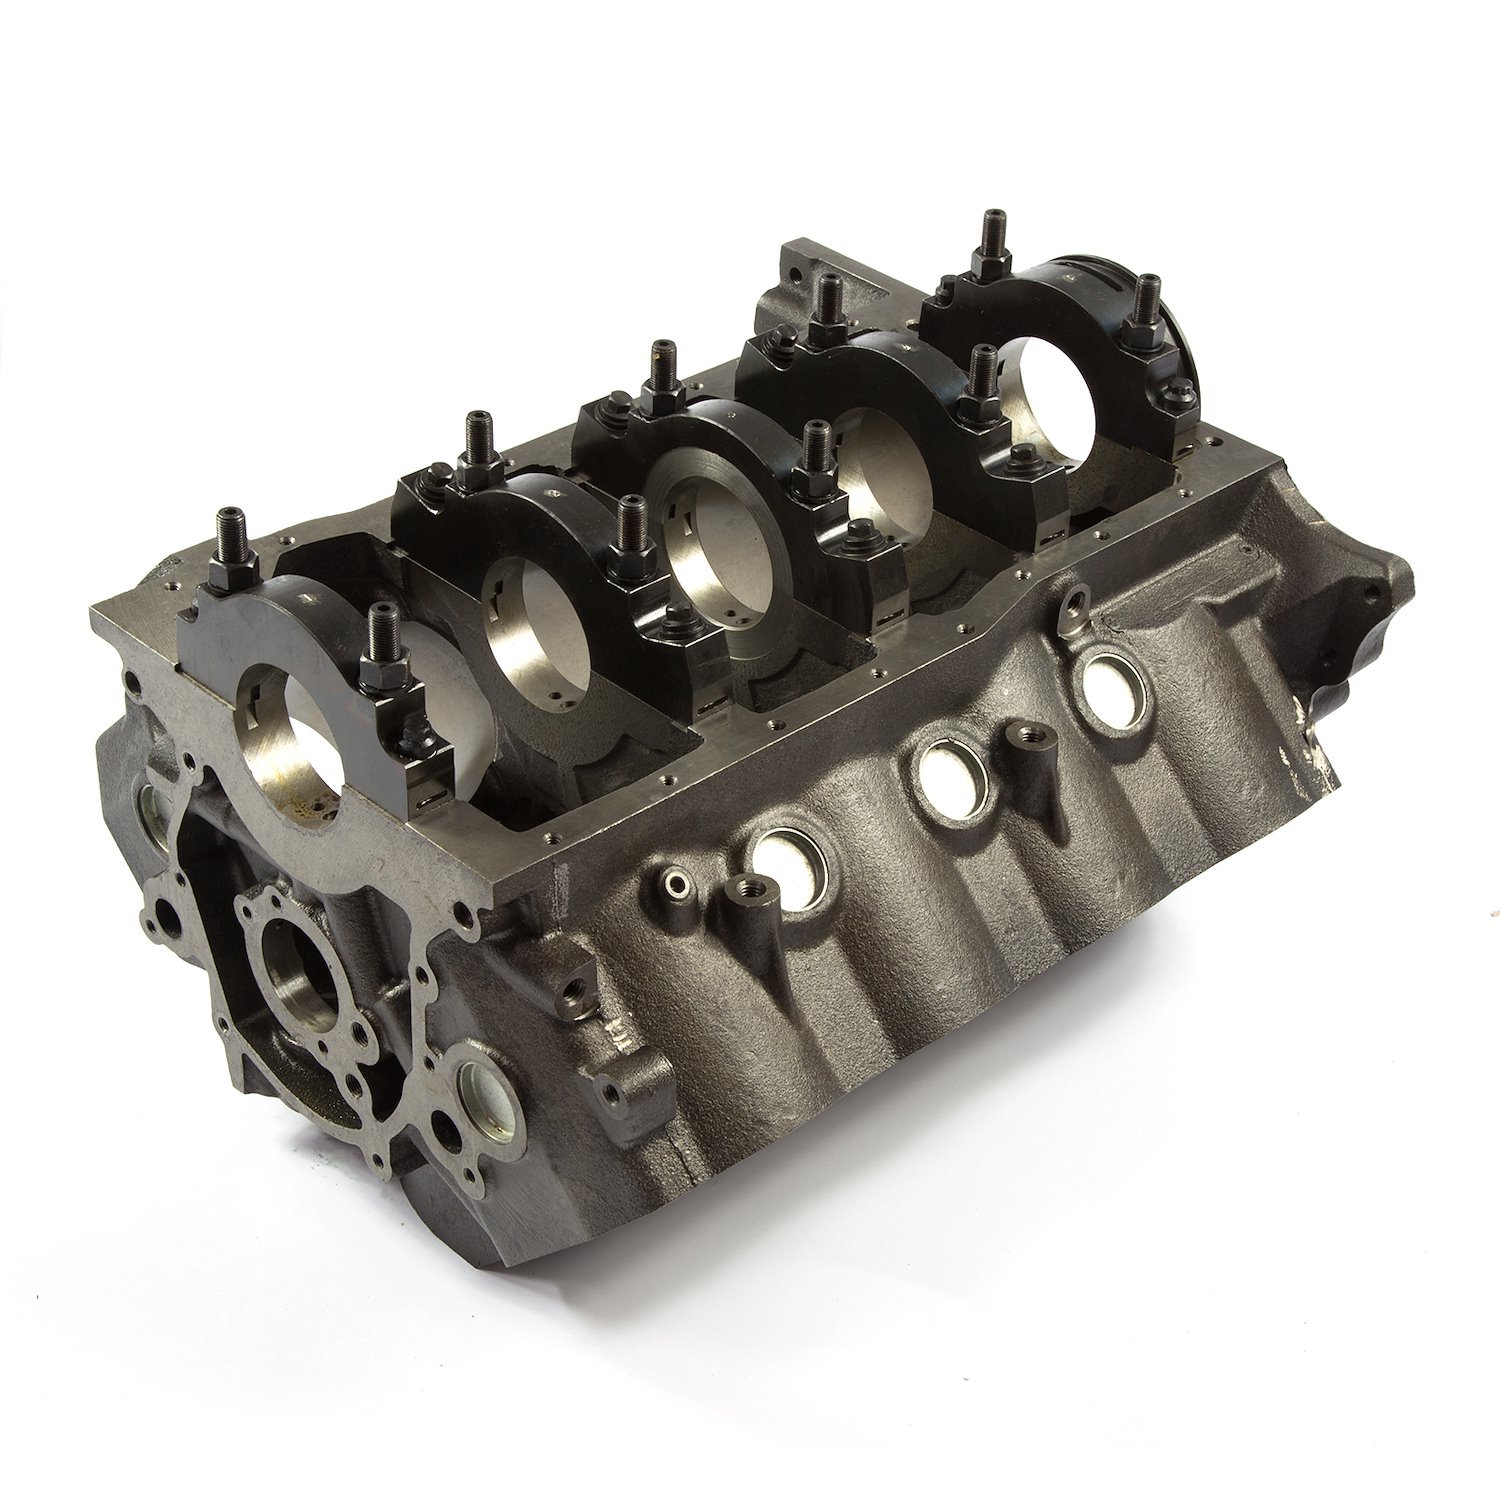 Cast Iron Severe-Duty Engine Block [Ford 351W Windsor]